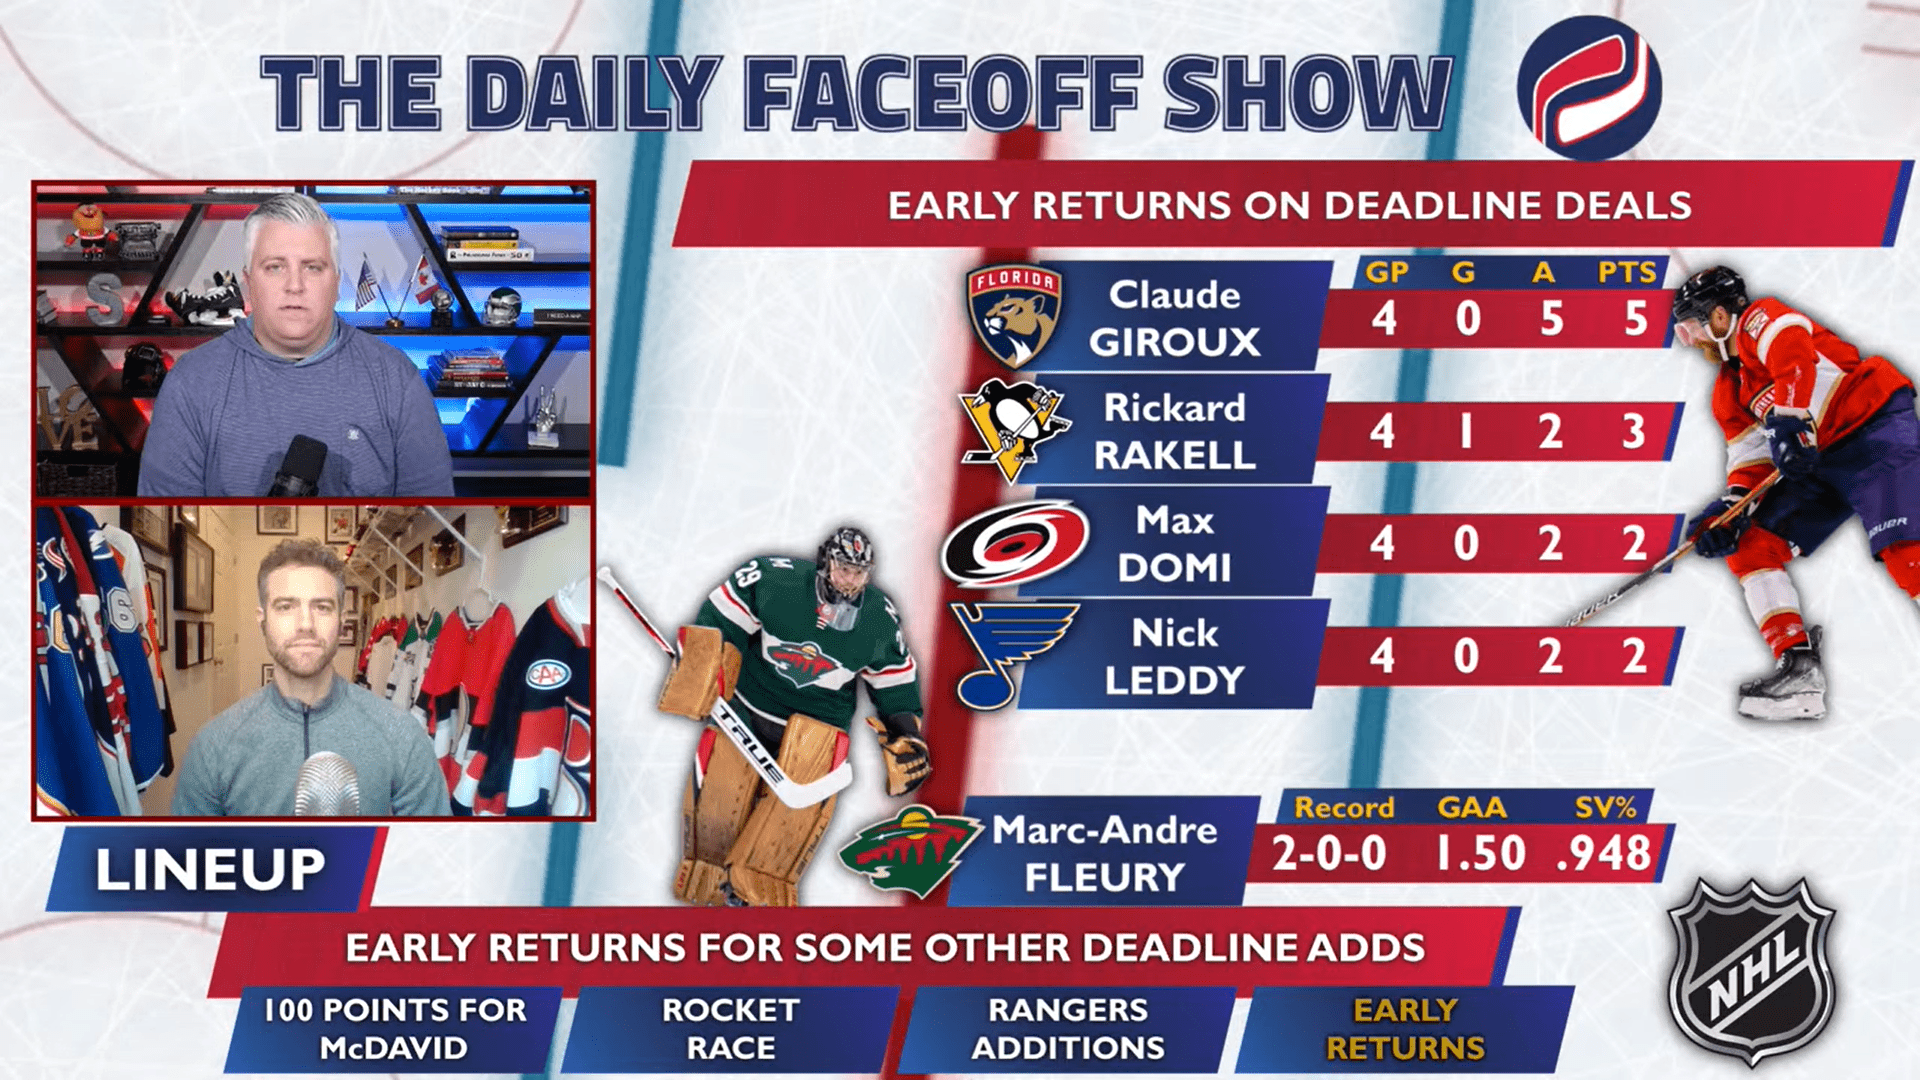 The Daily Faceoff Show: Which trade deadline additions have made an early impact?